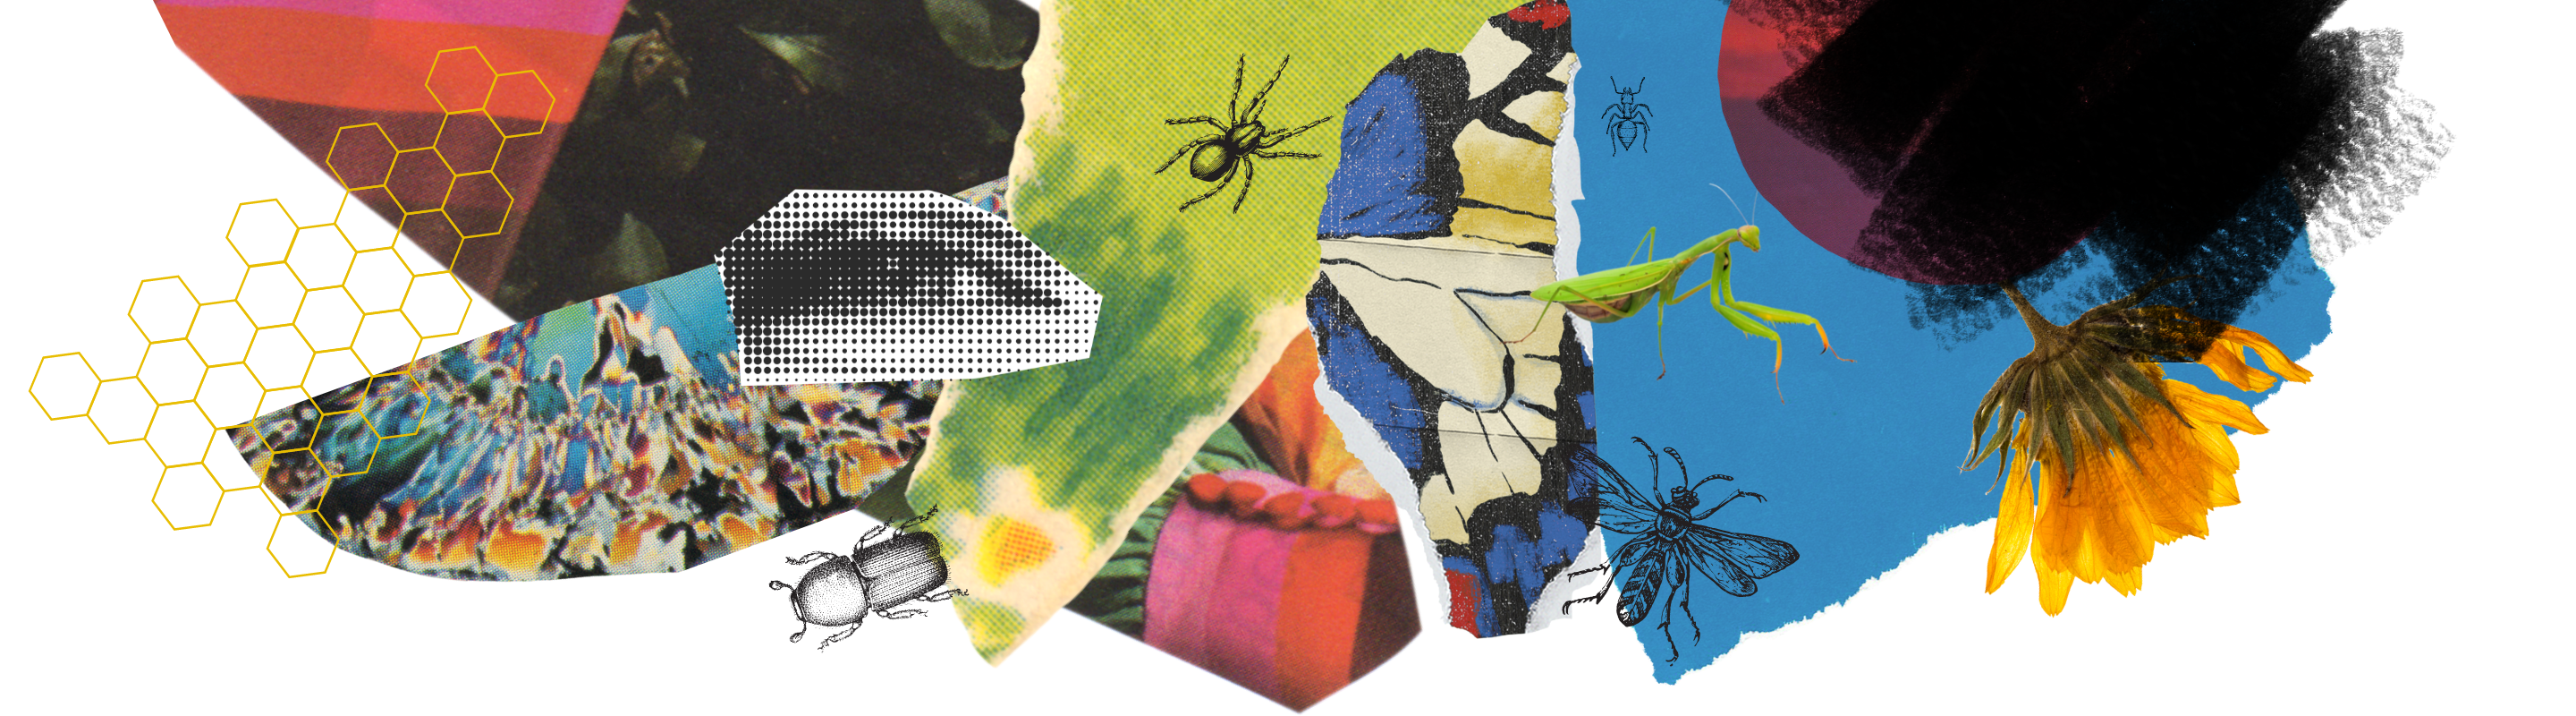 A colorful collage with insects, torn paper, a human eye, and a honeycomb